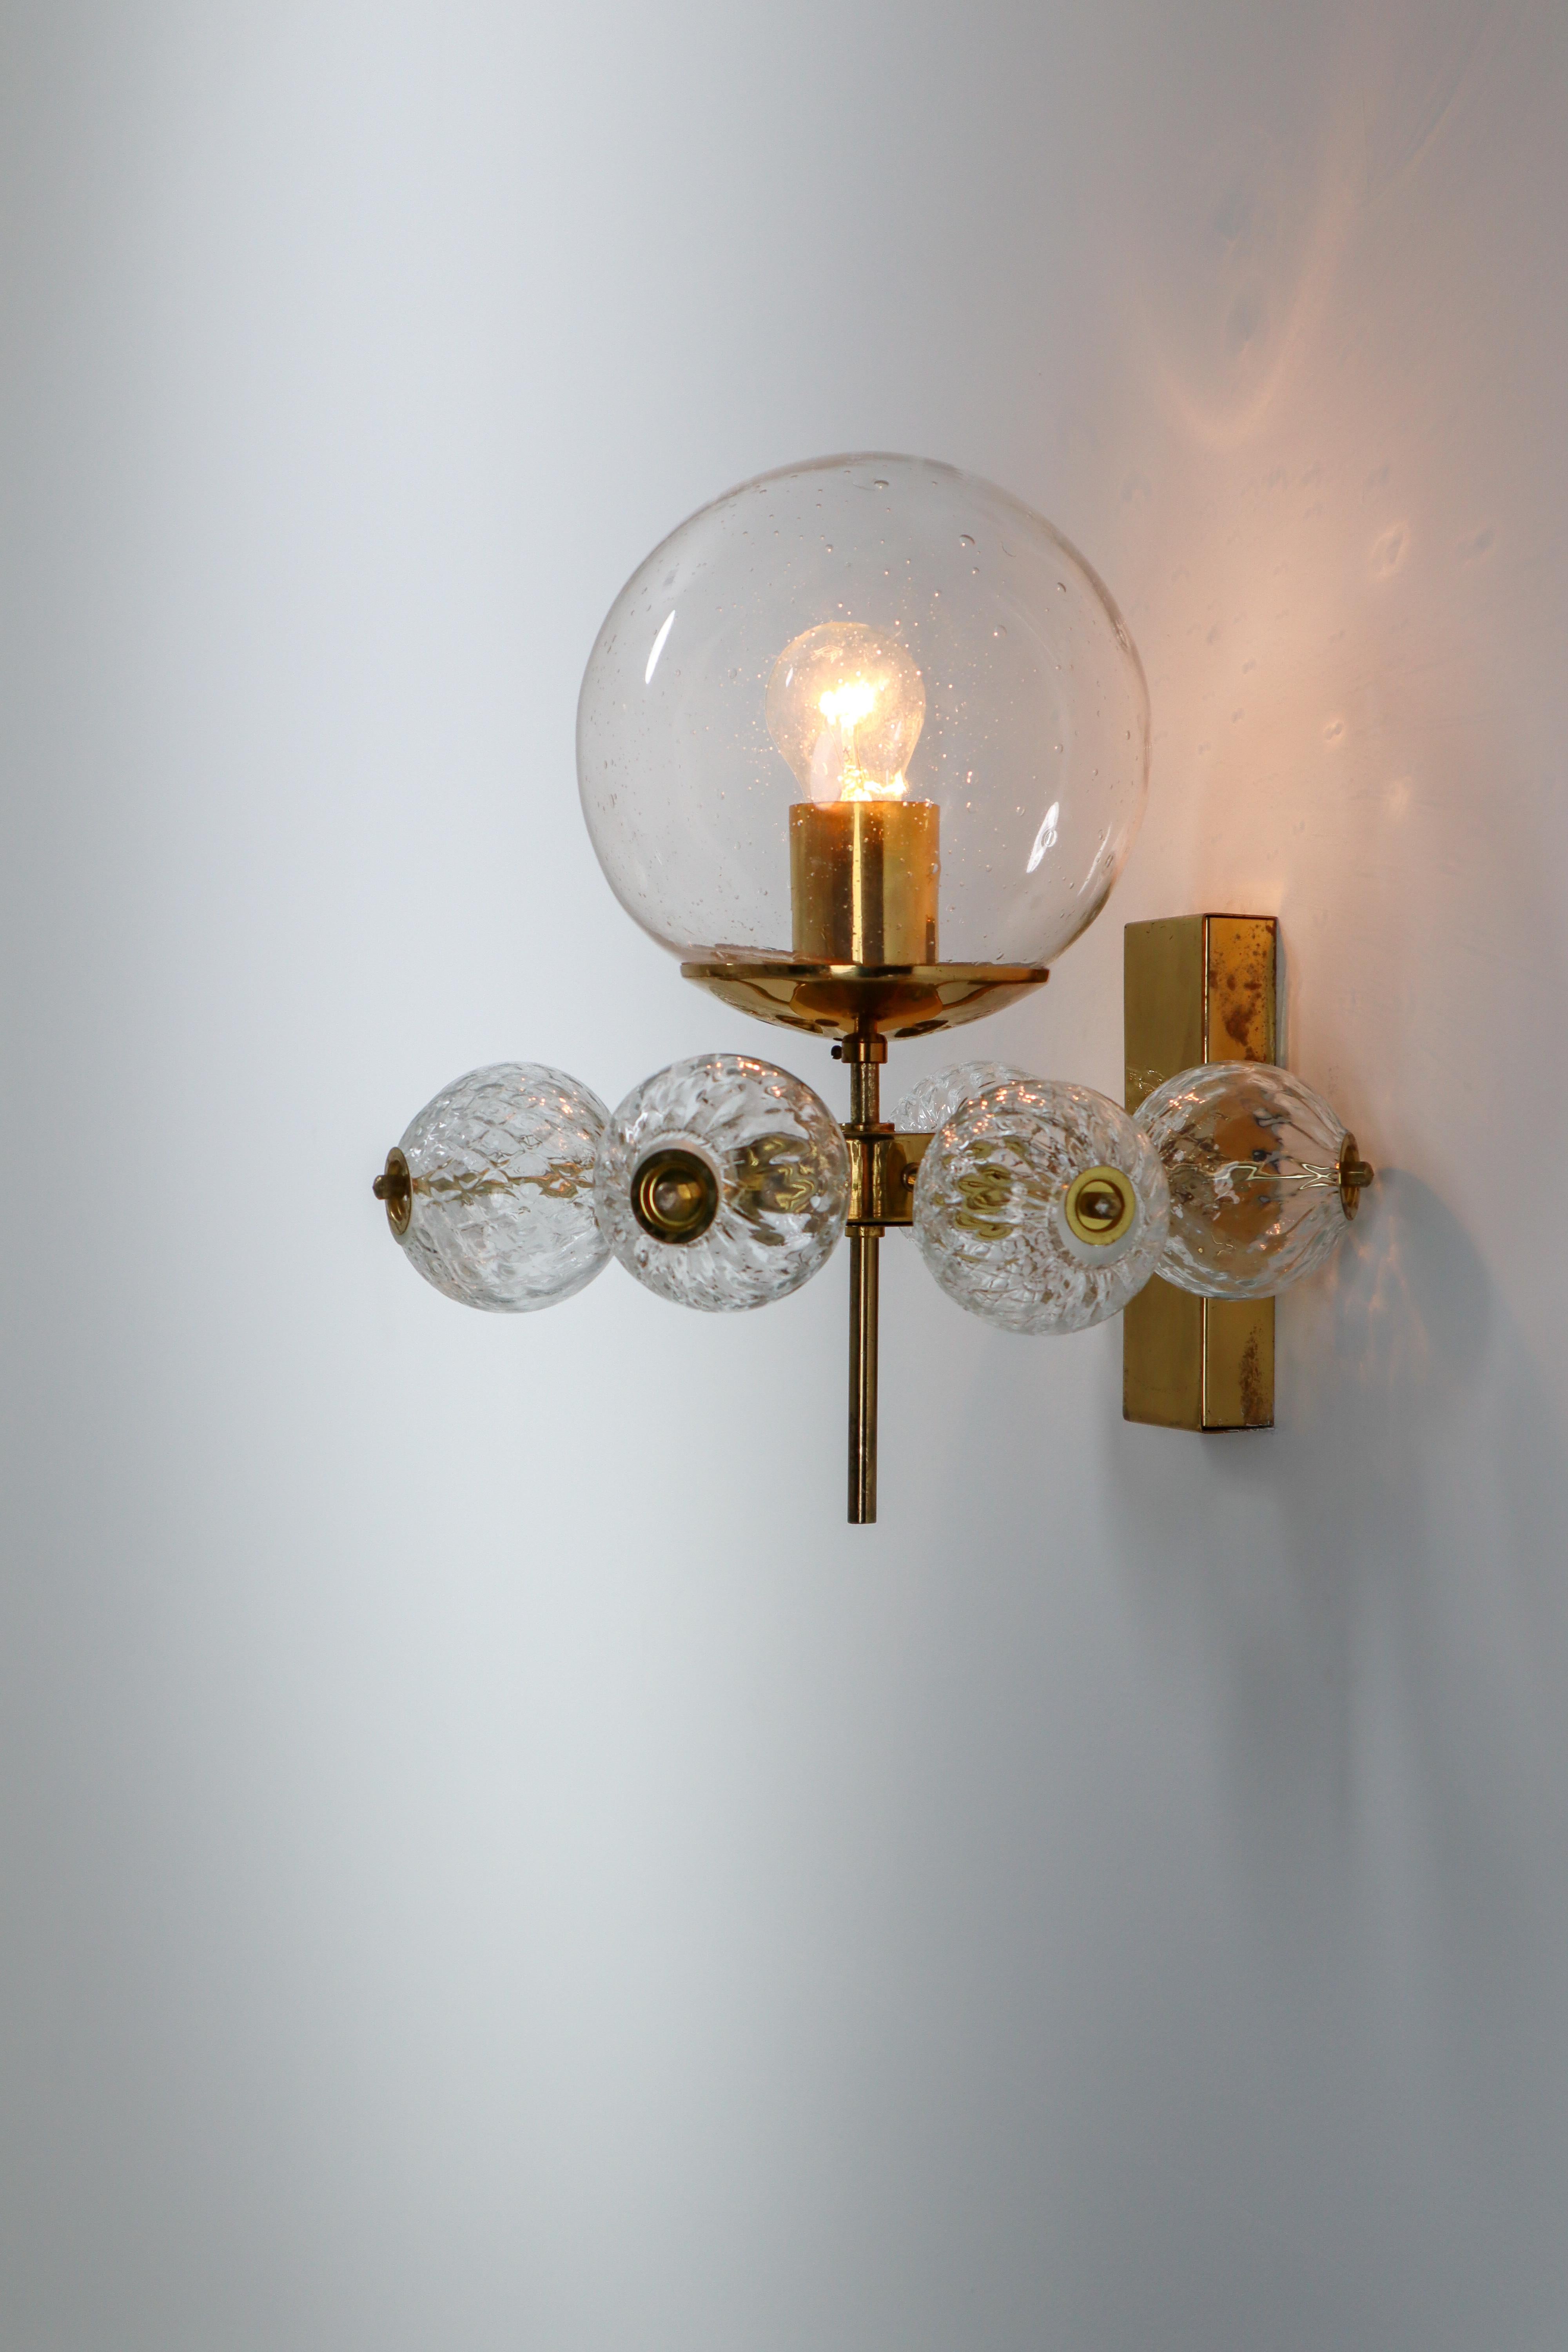 Large Set Midcentury Hotel Wall Chandeliers with Brass Fixture, Europe 1970s For Sale 3